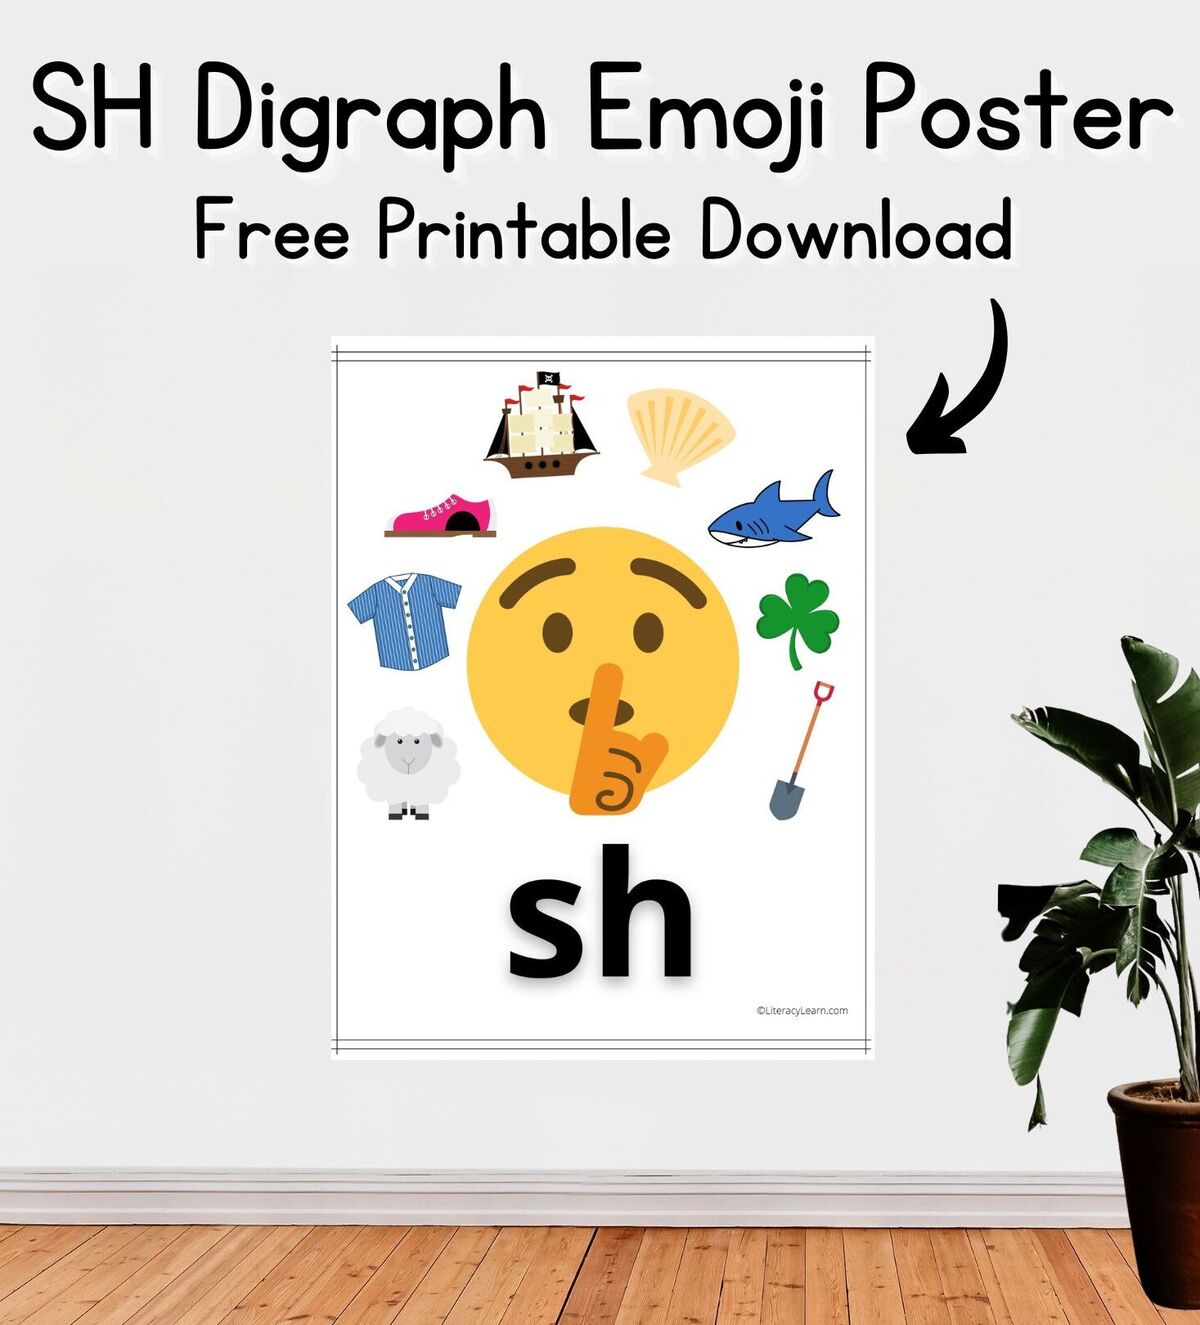 Graphic with a colorful poster on a wall showing a large sh emoji and sh pictures. 